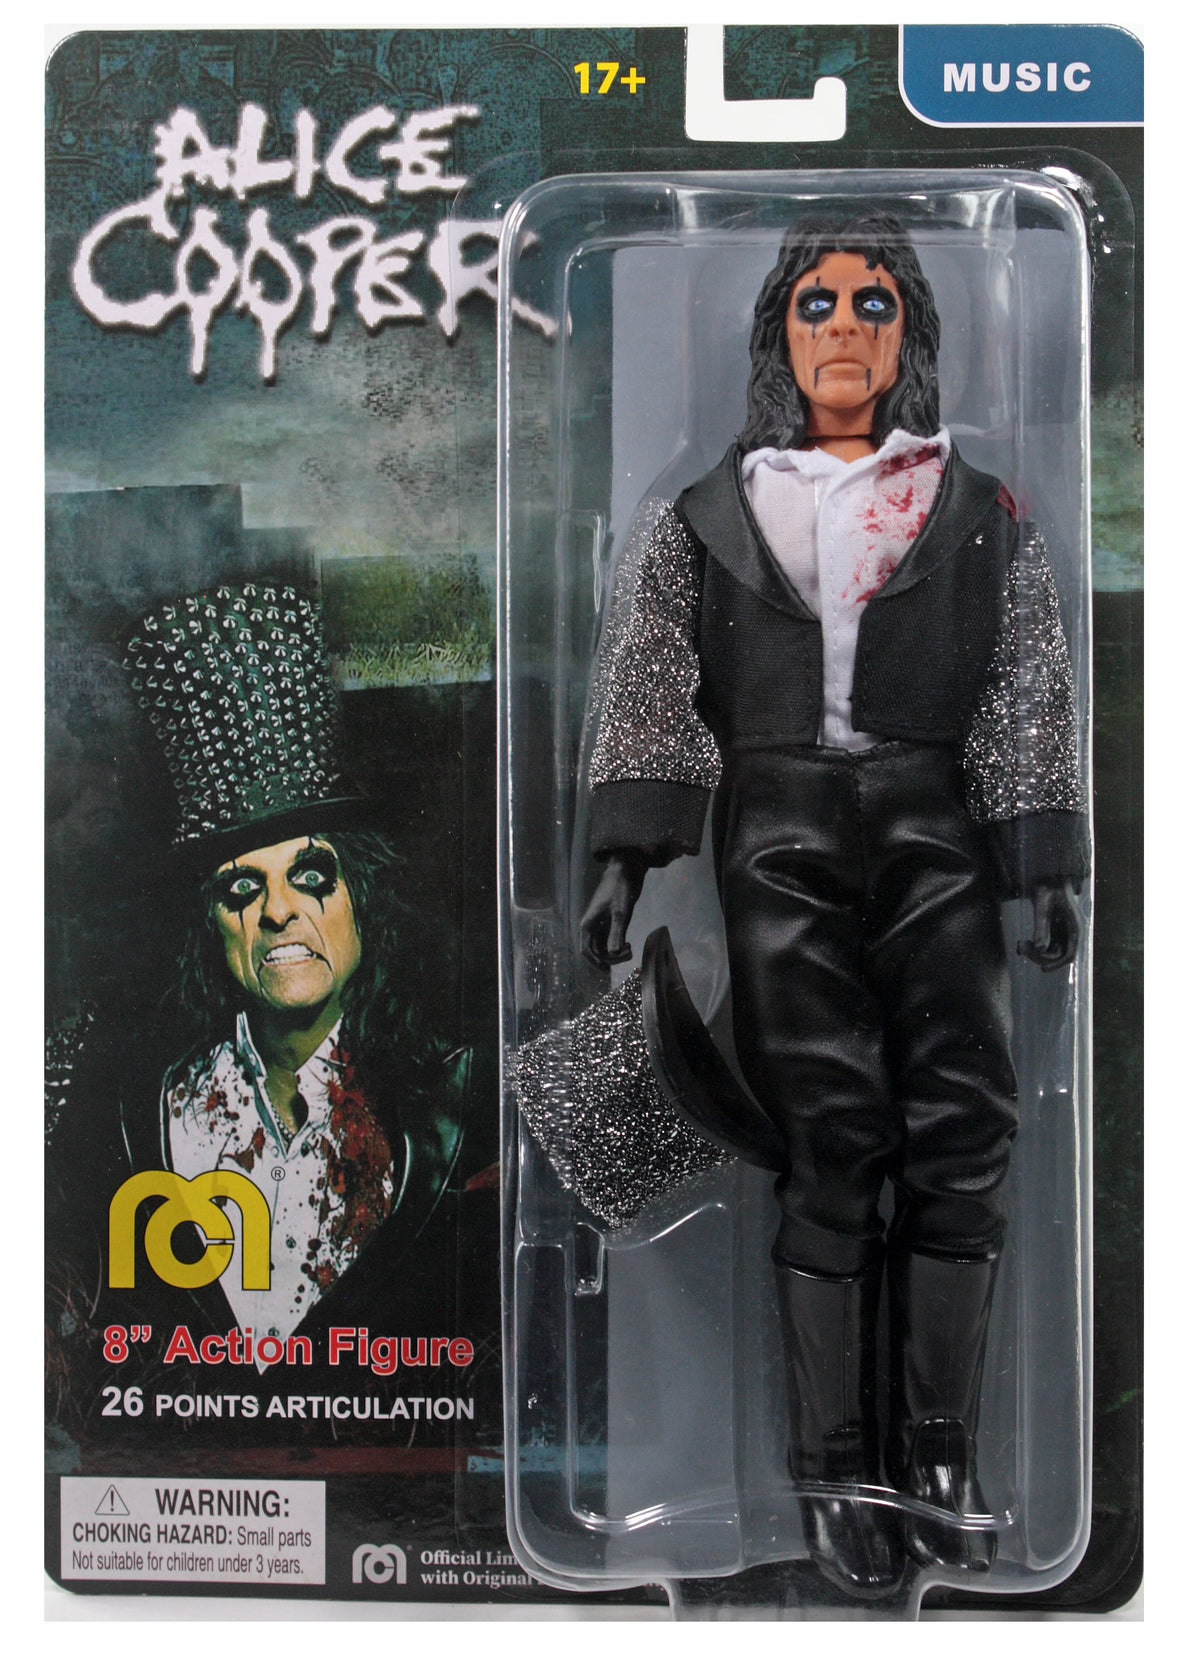 Damaged Package Mego Music Wave 18 - Alice Cooper - "Welcome to My Nightmare" 8" Action Figure (Re-Release of Wave 17 Version)